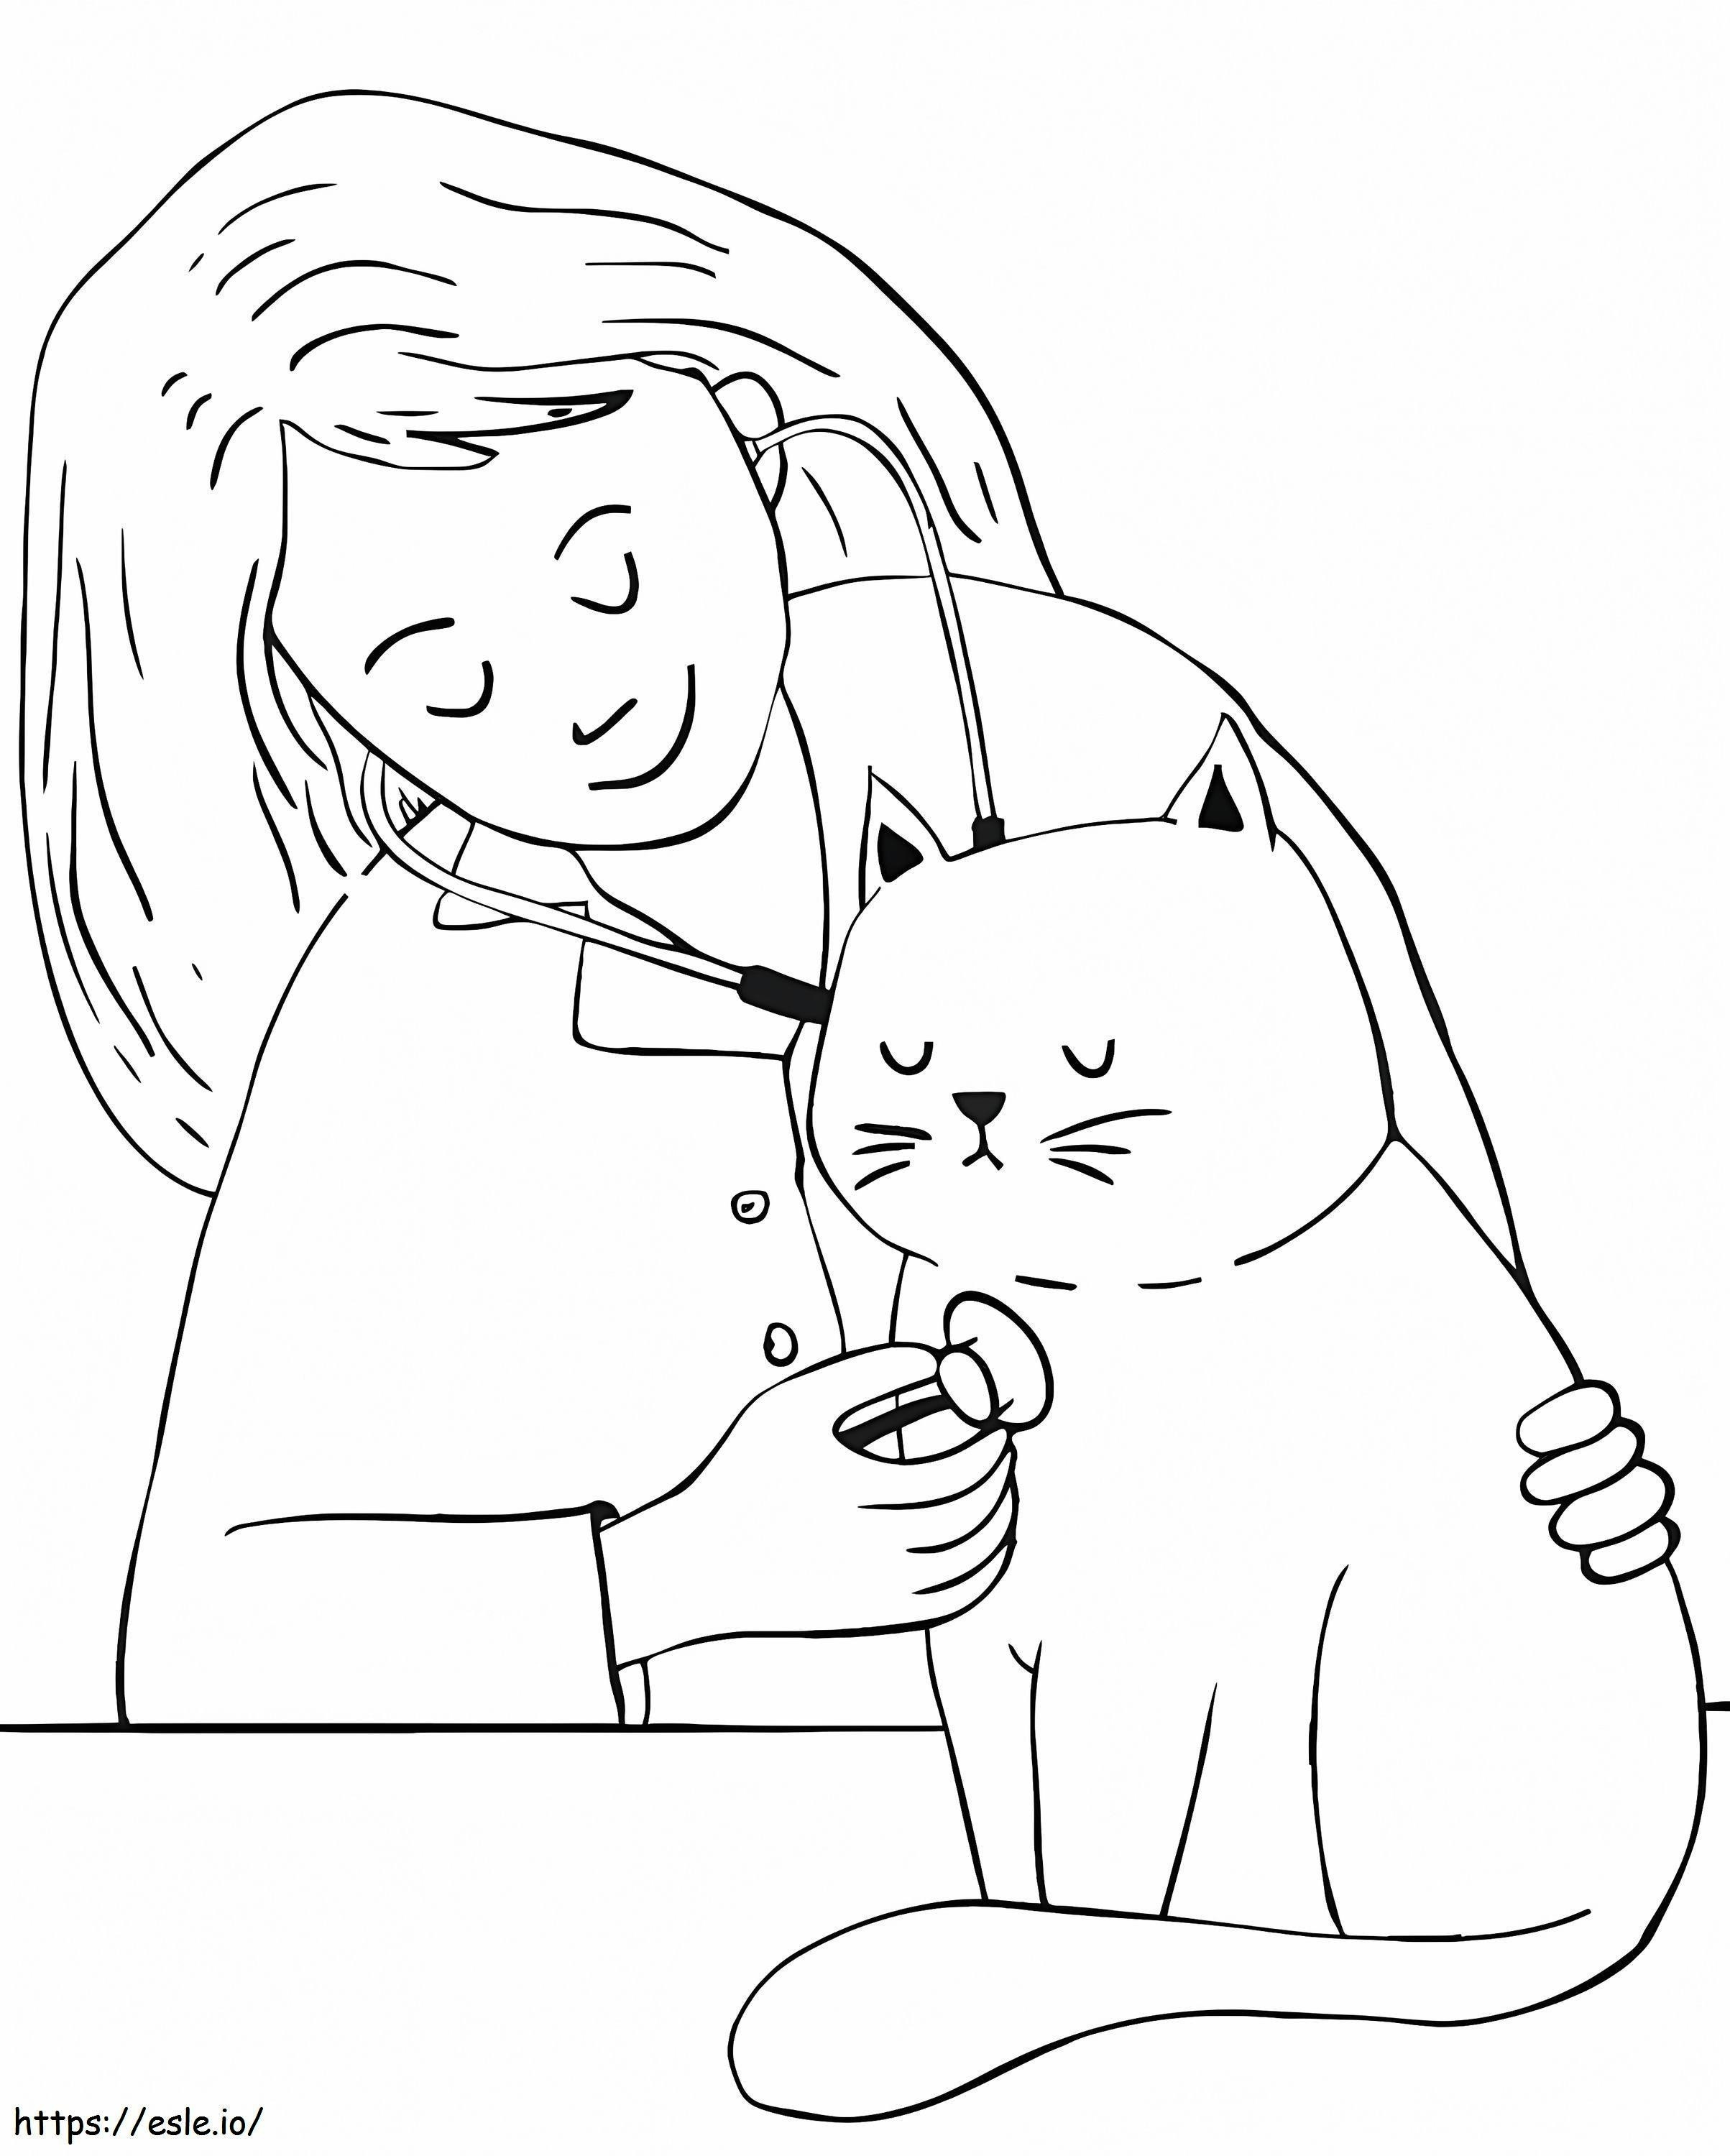 Veterinarian And A Cat coloring page